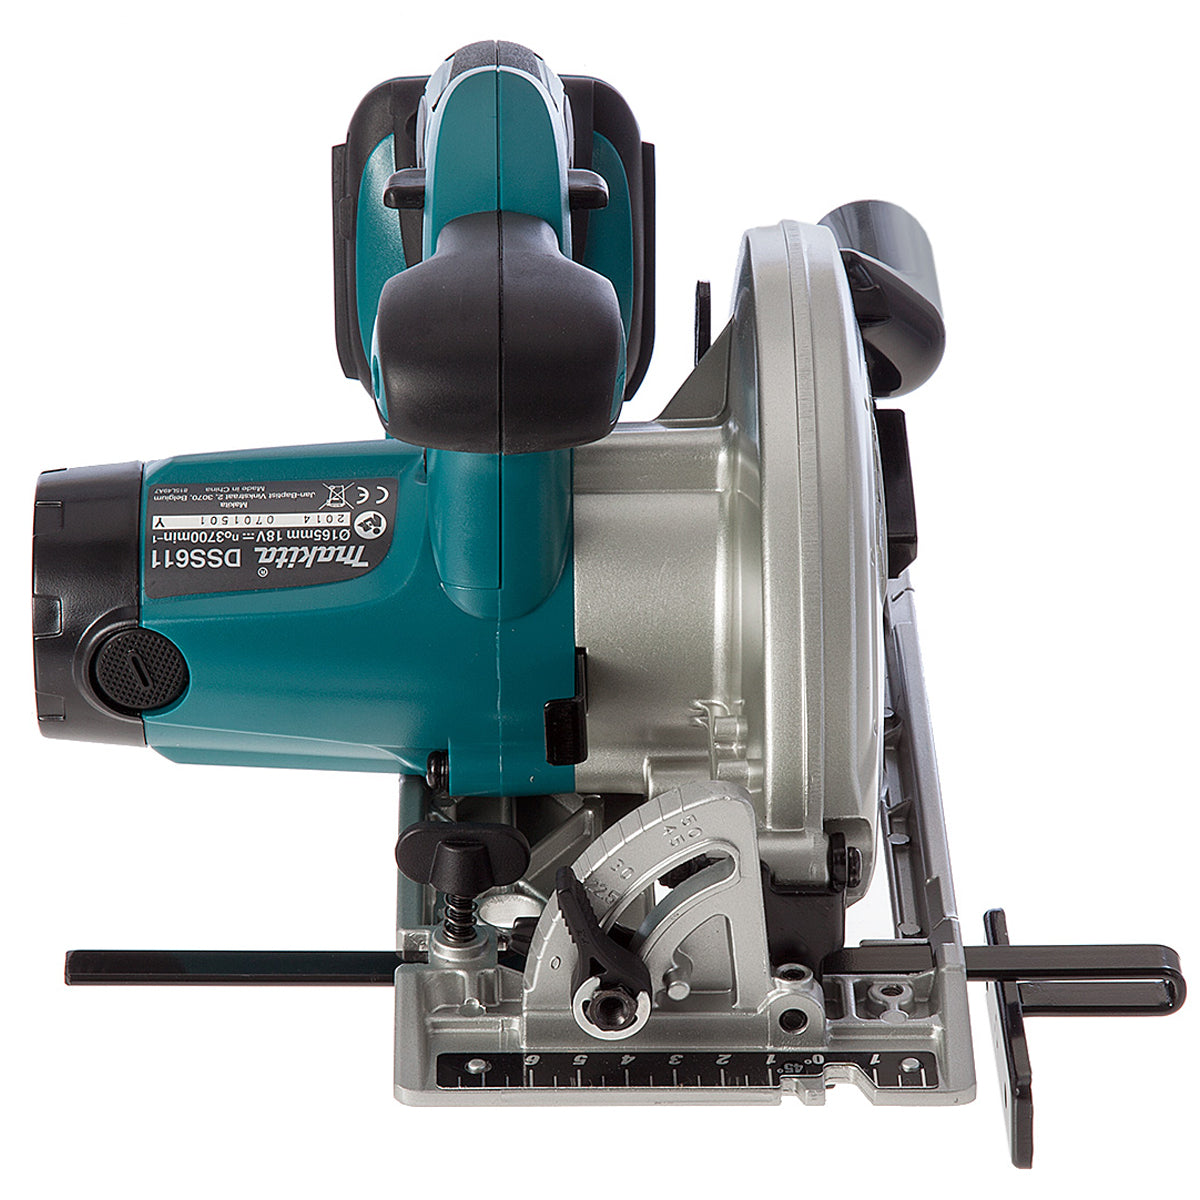 Makita DSS611Z 18V 165mm Circular Saw with 1 x 5.0Ah Battery & Charger in Case